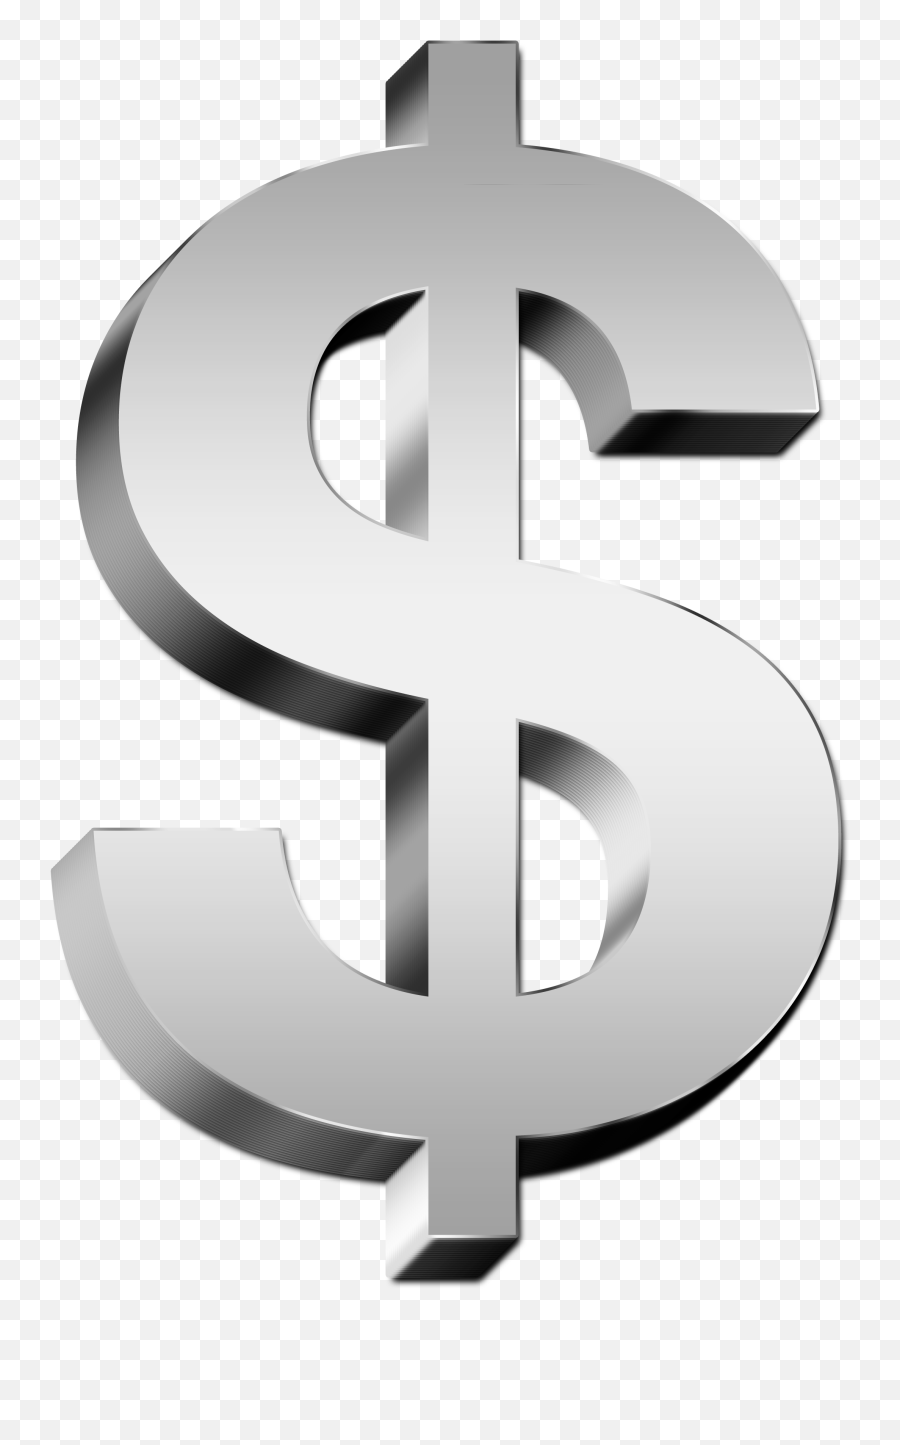 Silver Dollar Sign Png Image For Free Download - Silver Dollar Sign Transparent,Cash Transparent Background